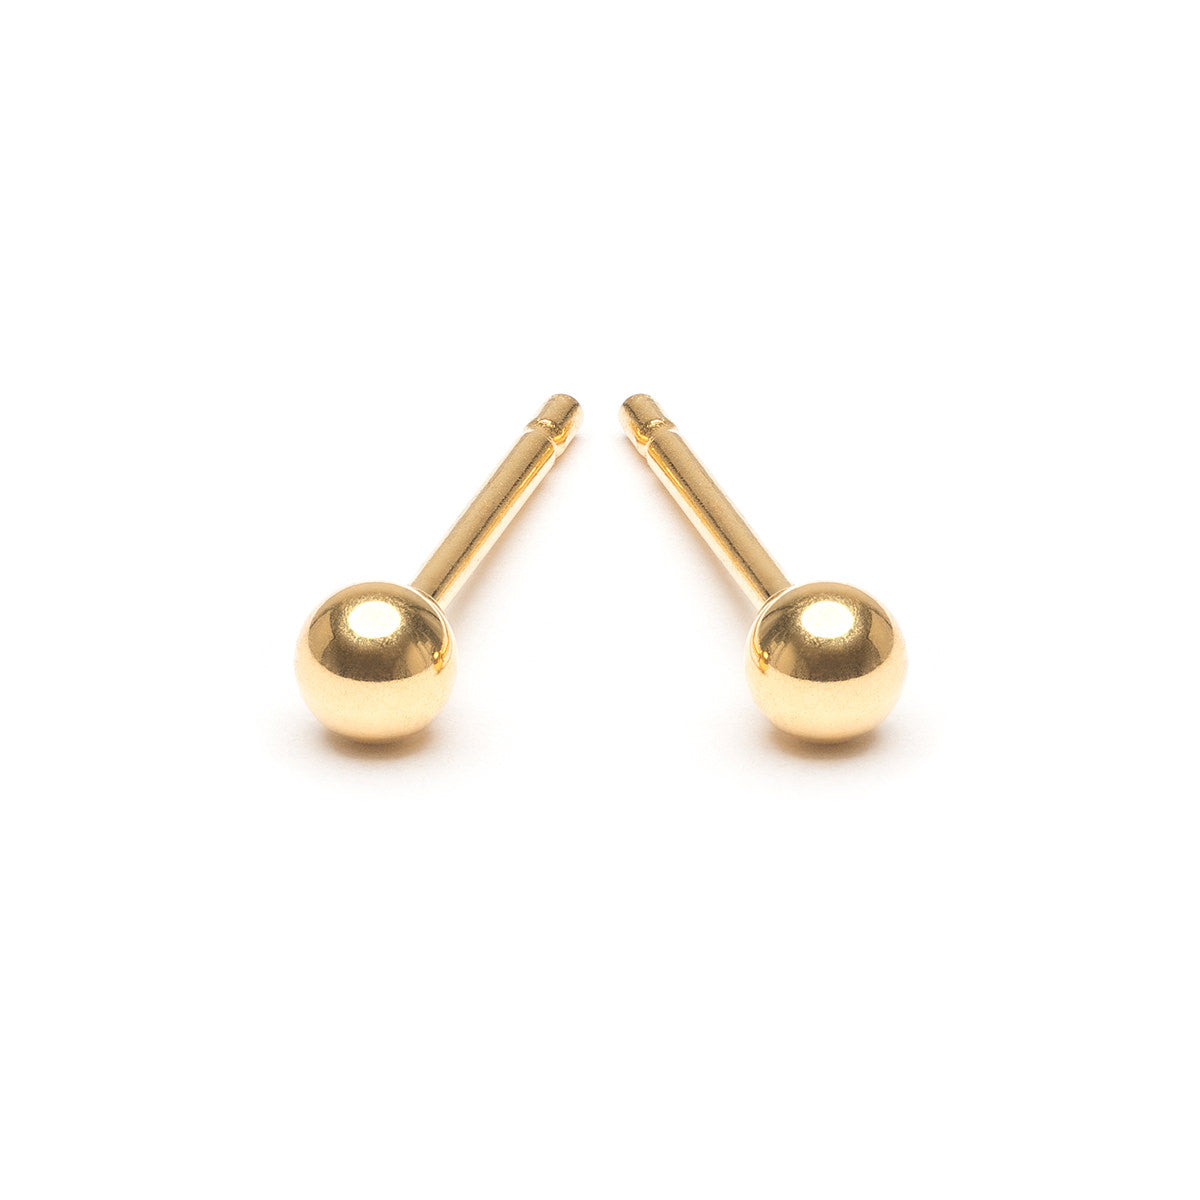 Mini Ball Stud Earring Gold Plated - Simply Whispers